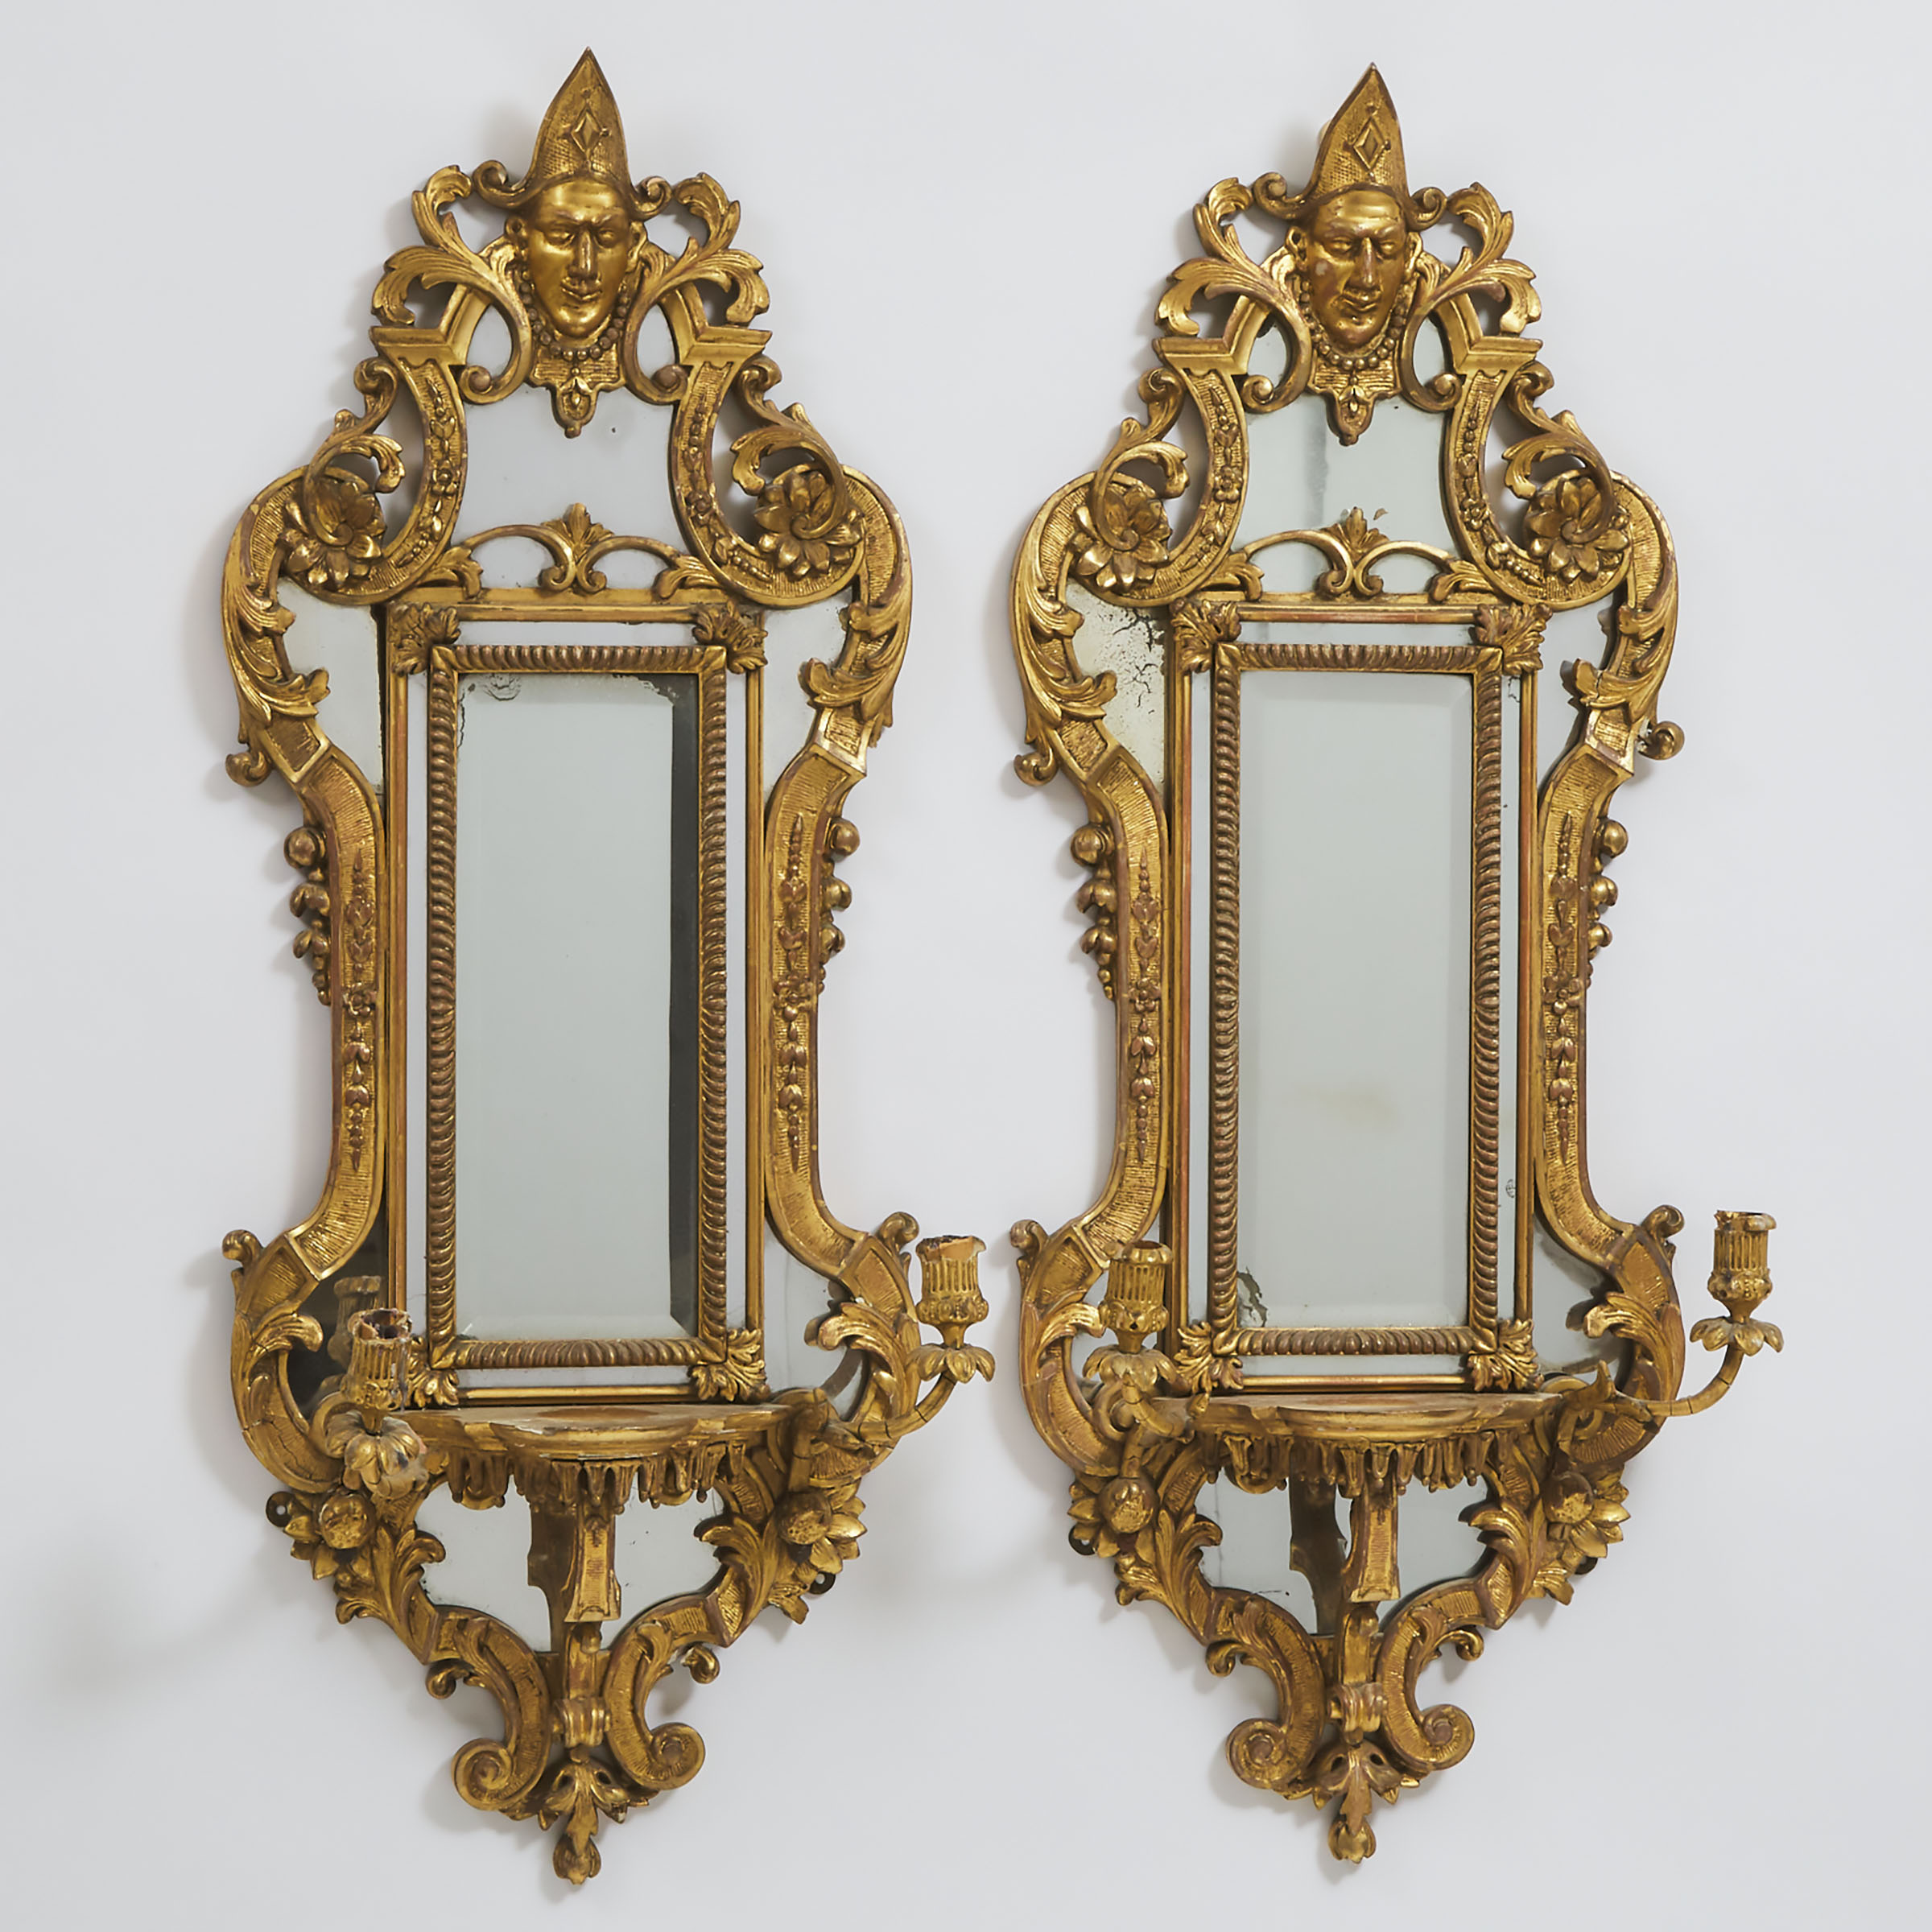 Pair Continental Mirror Back Giltwood Wall Sconce Brackets, early 20th century